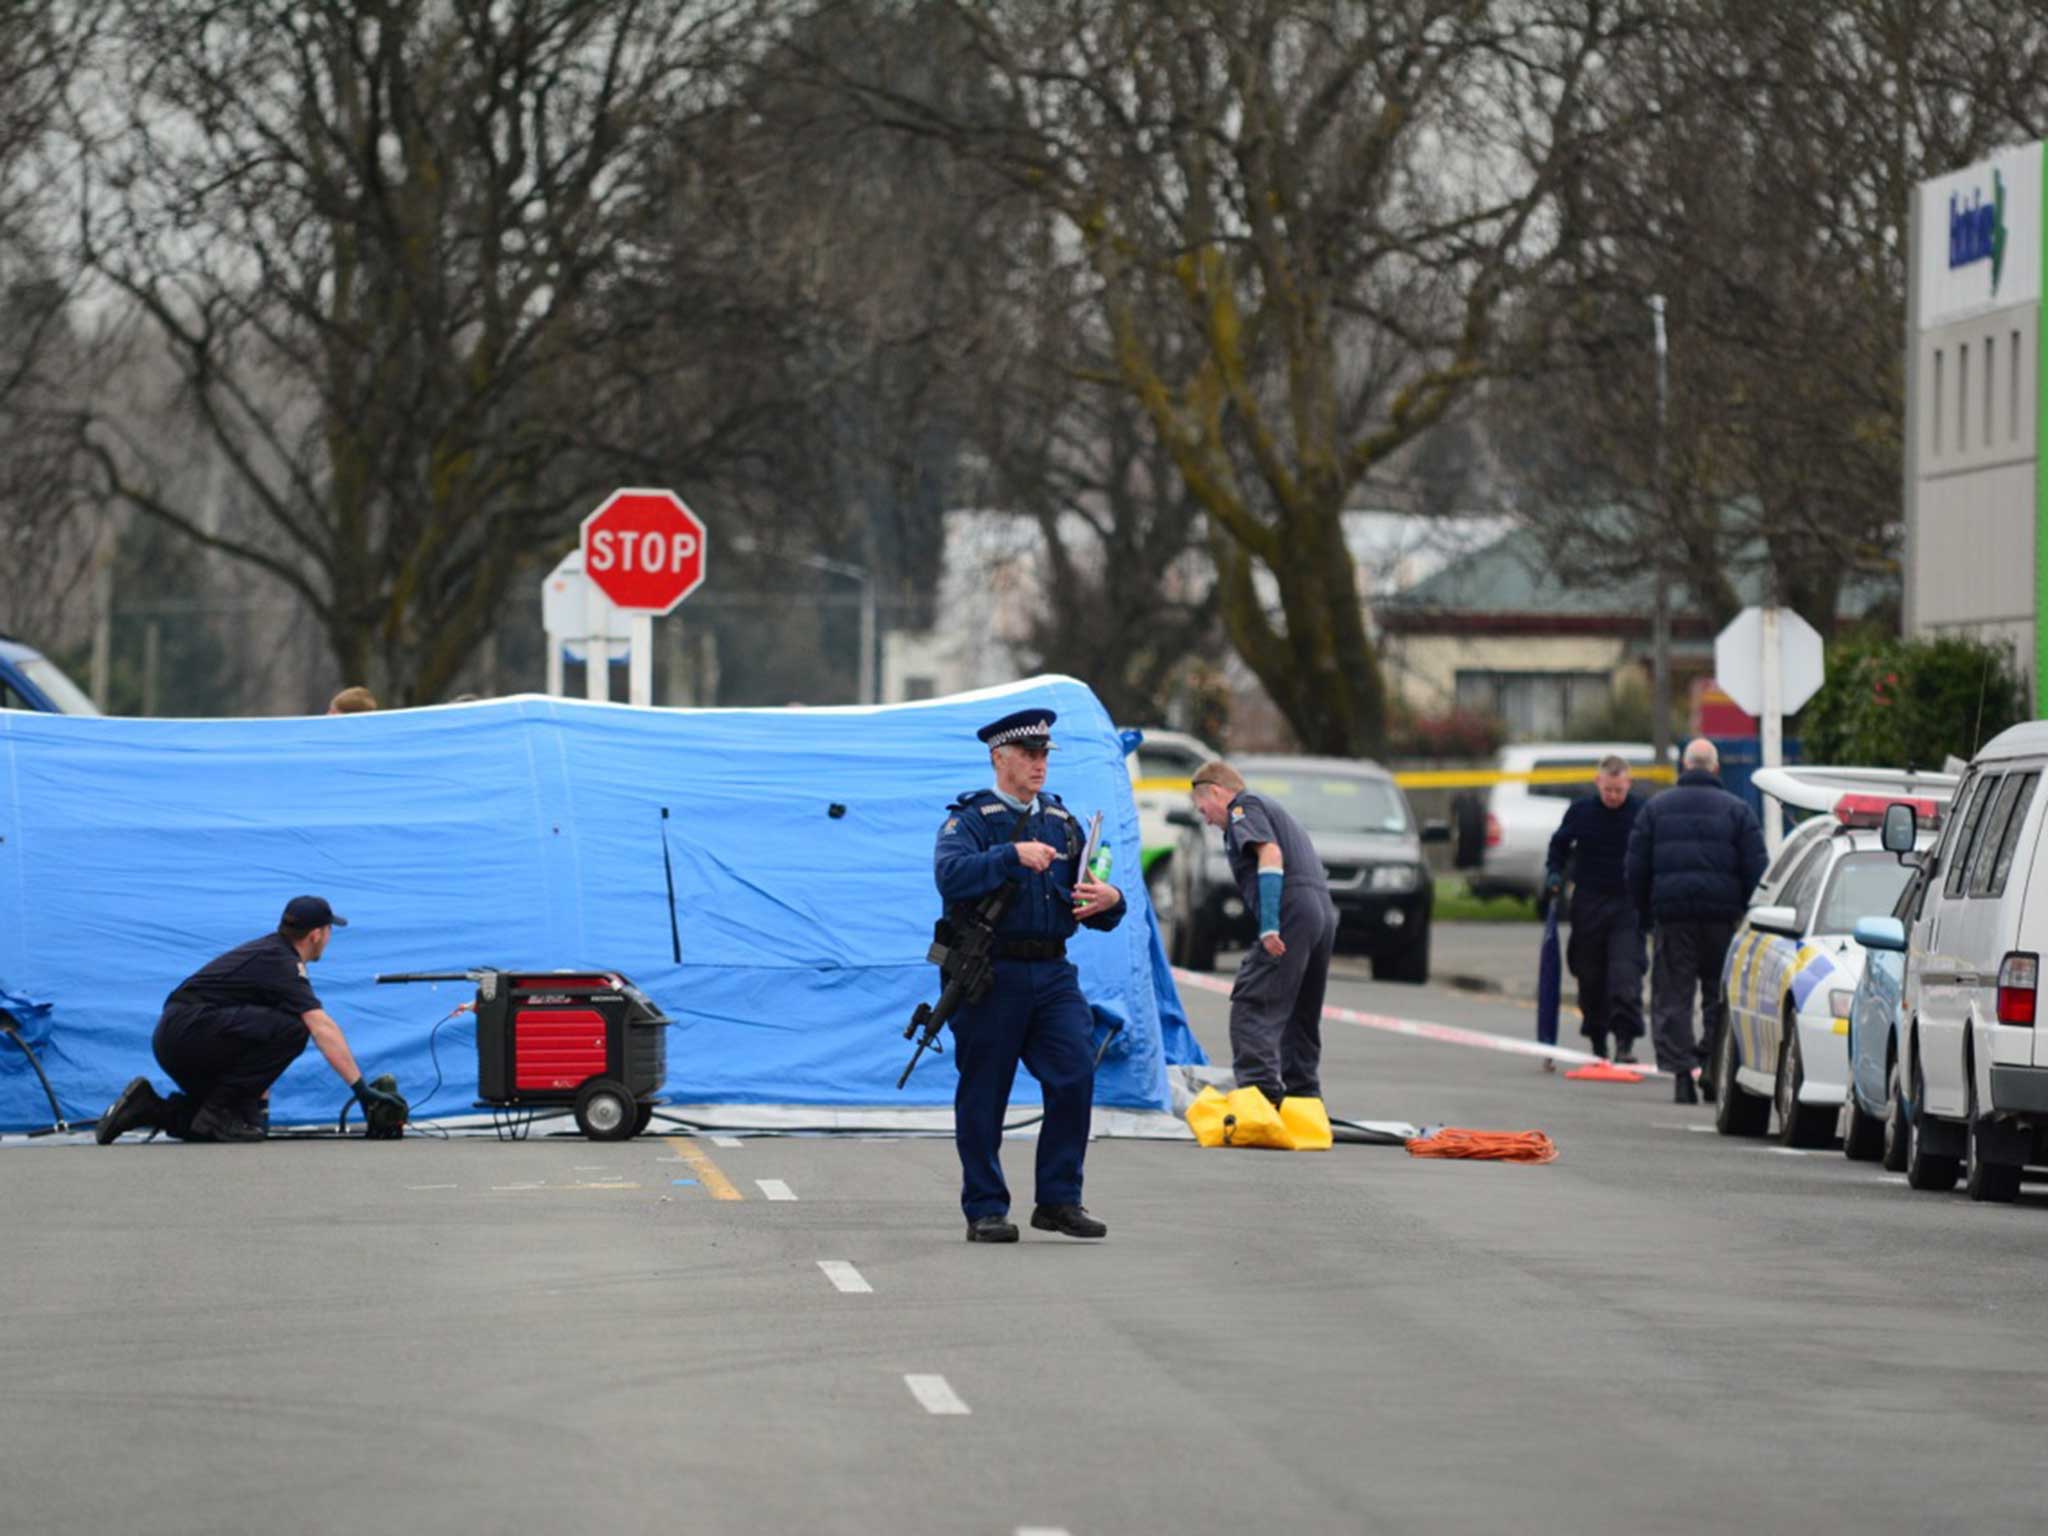 An armed officer stands in front of the crime scene in New Zealand